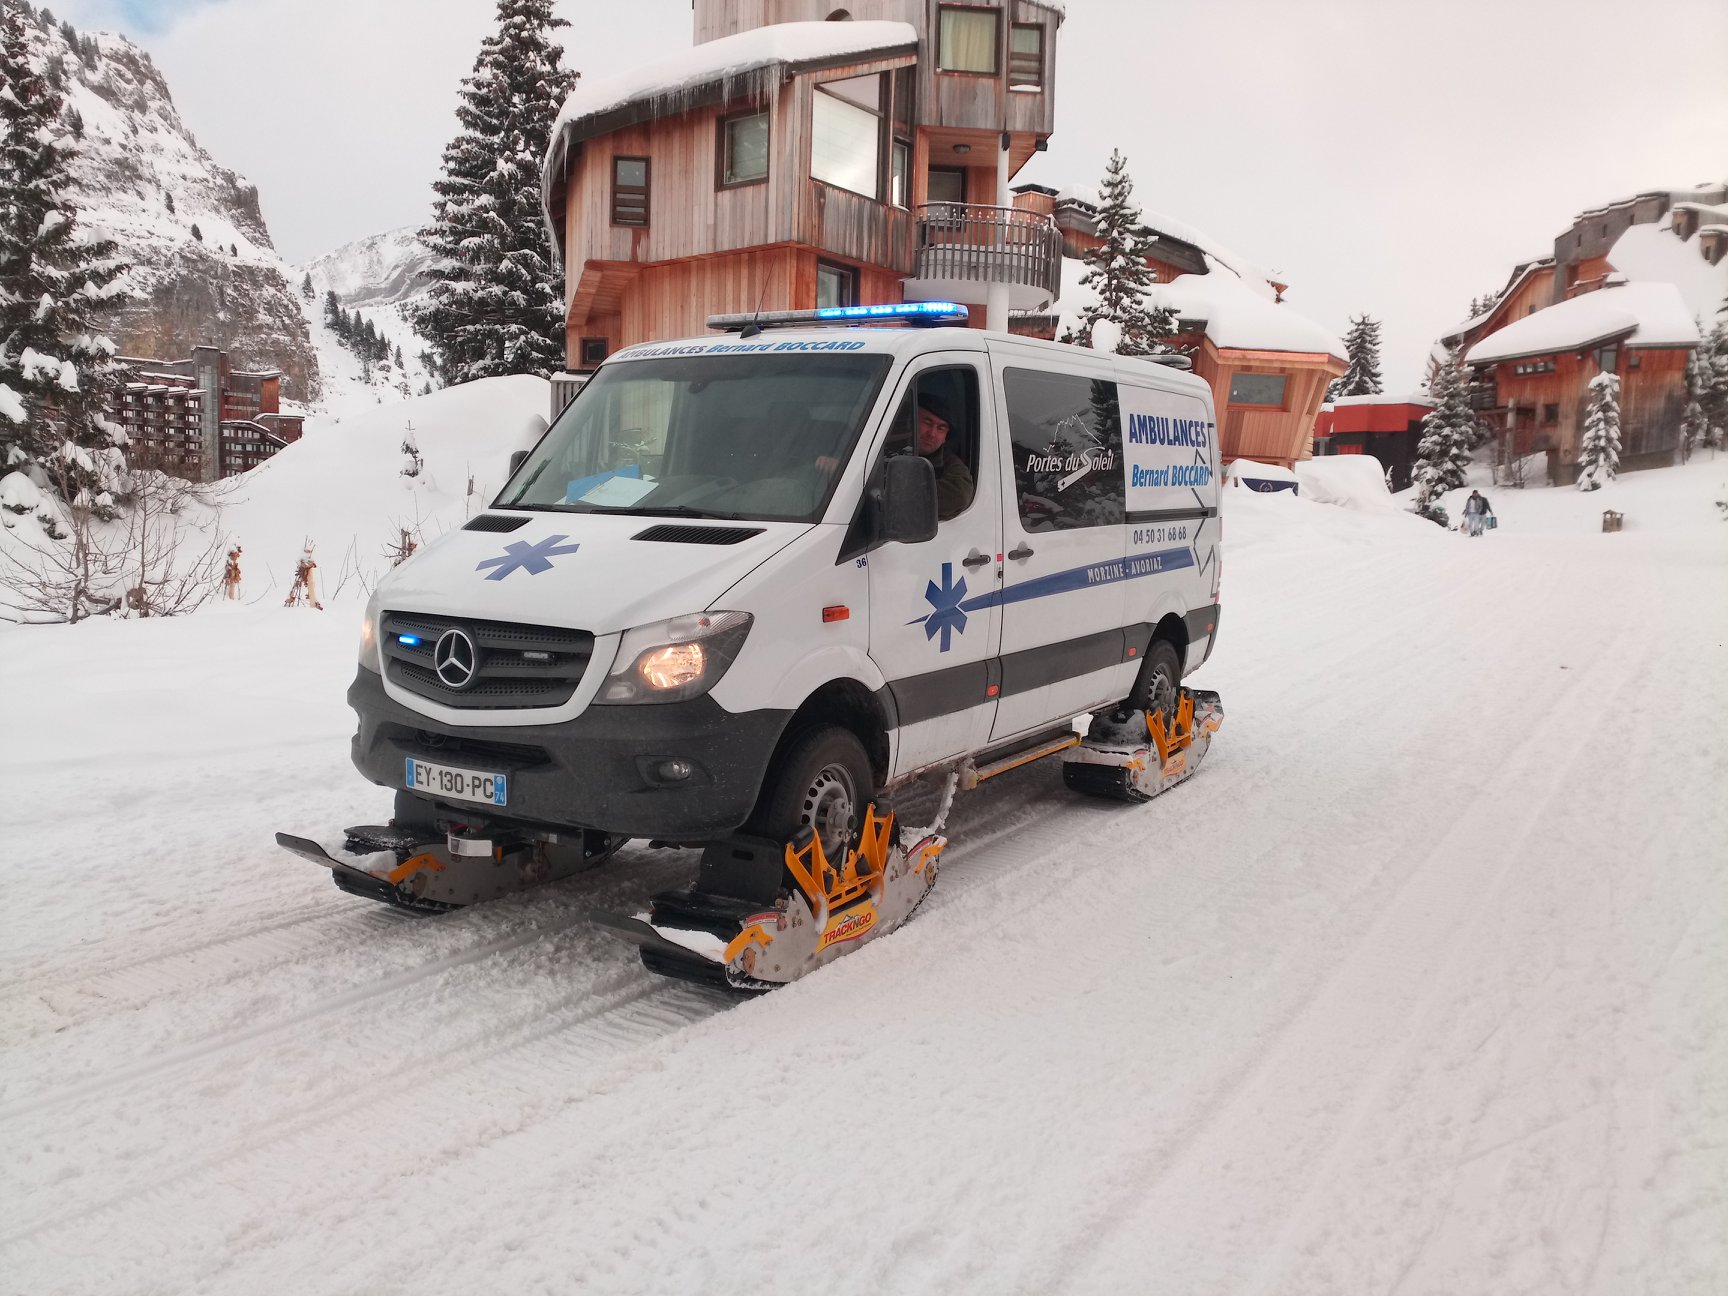 Special vehicle shoes to climb snow mountains.